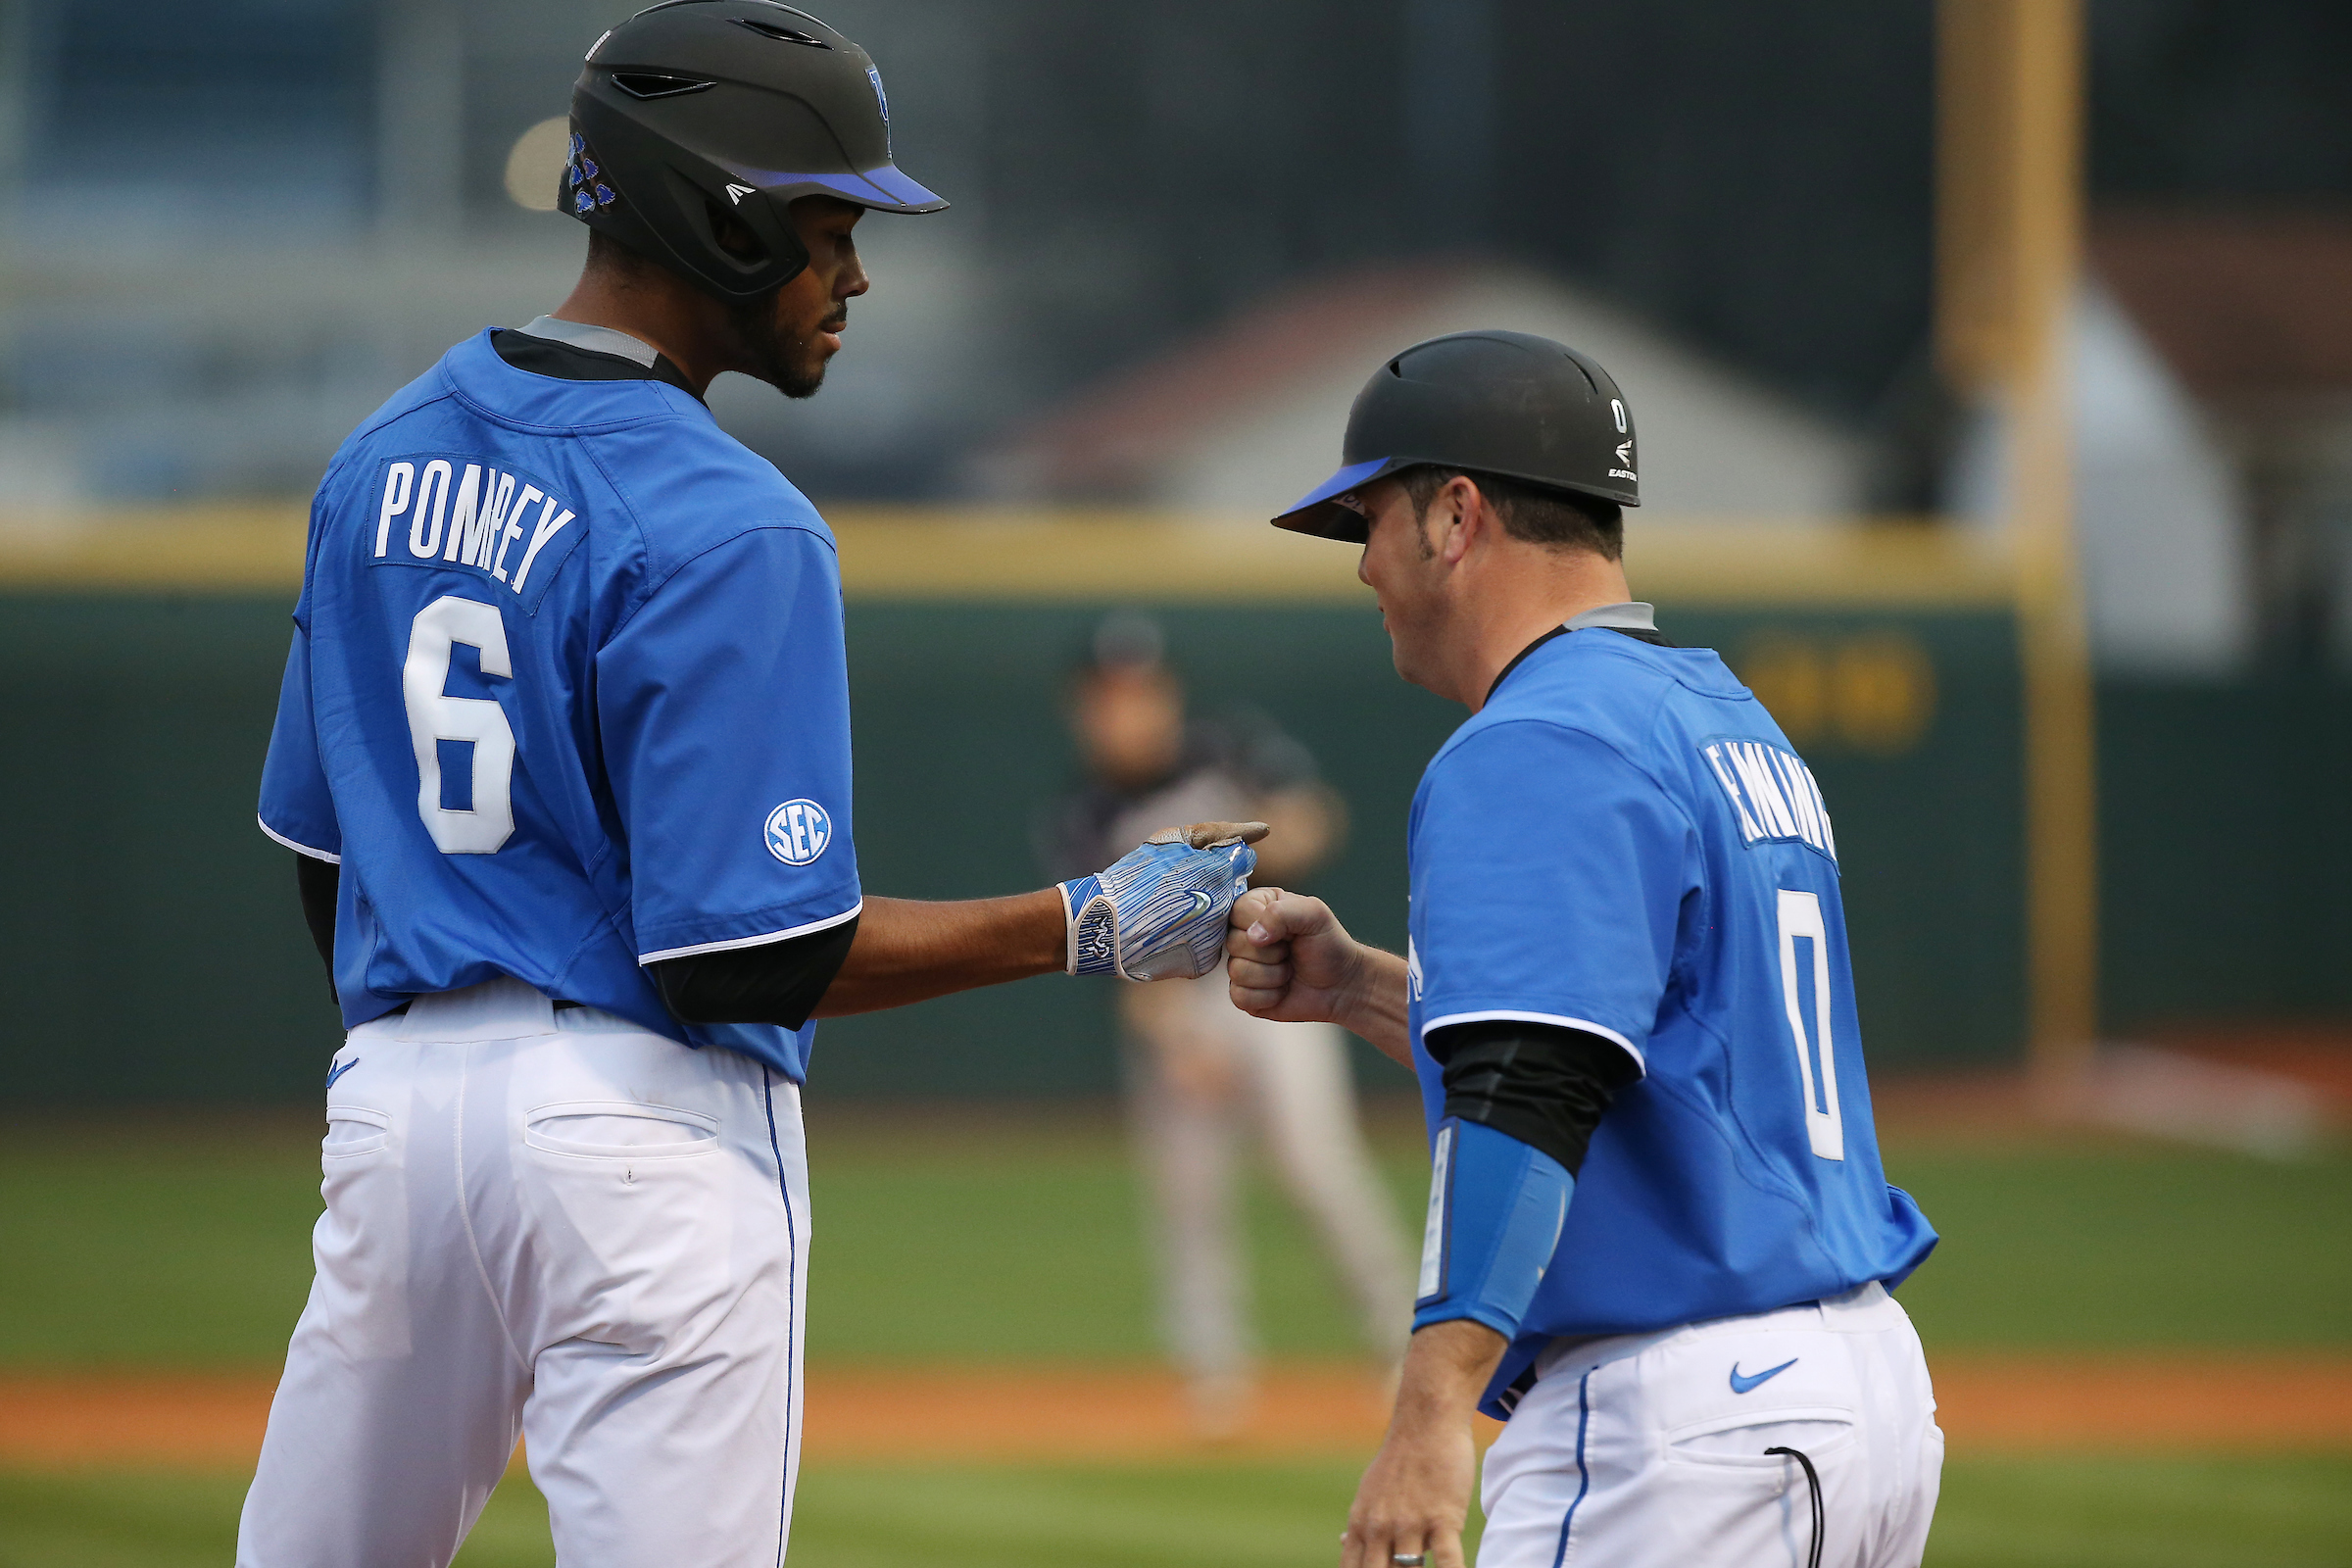 Pompey Closes Torrid Weekend Series with Four Hits